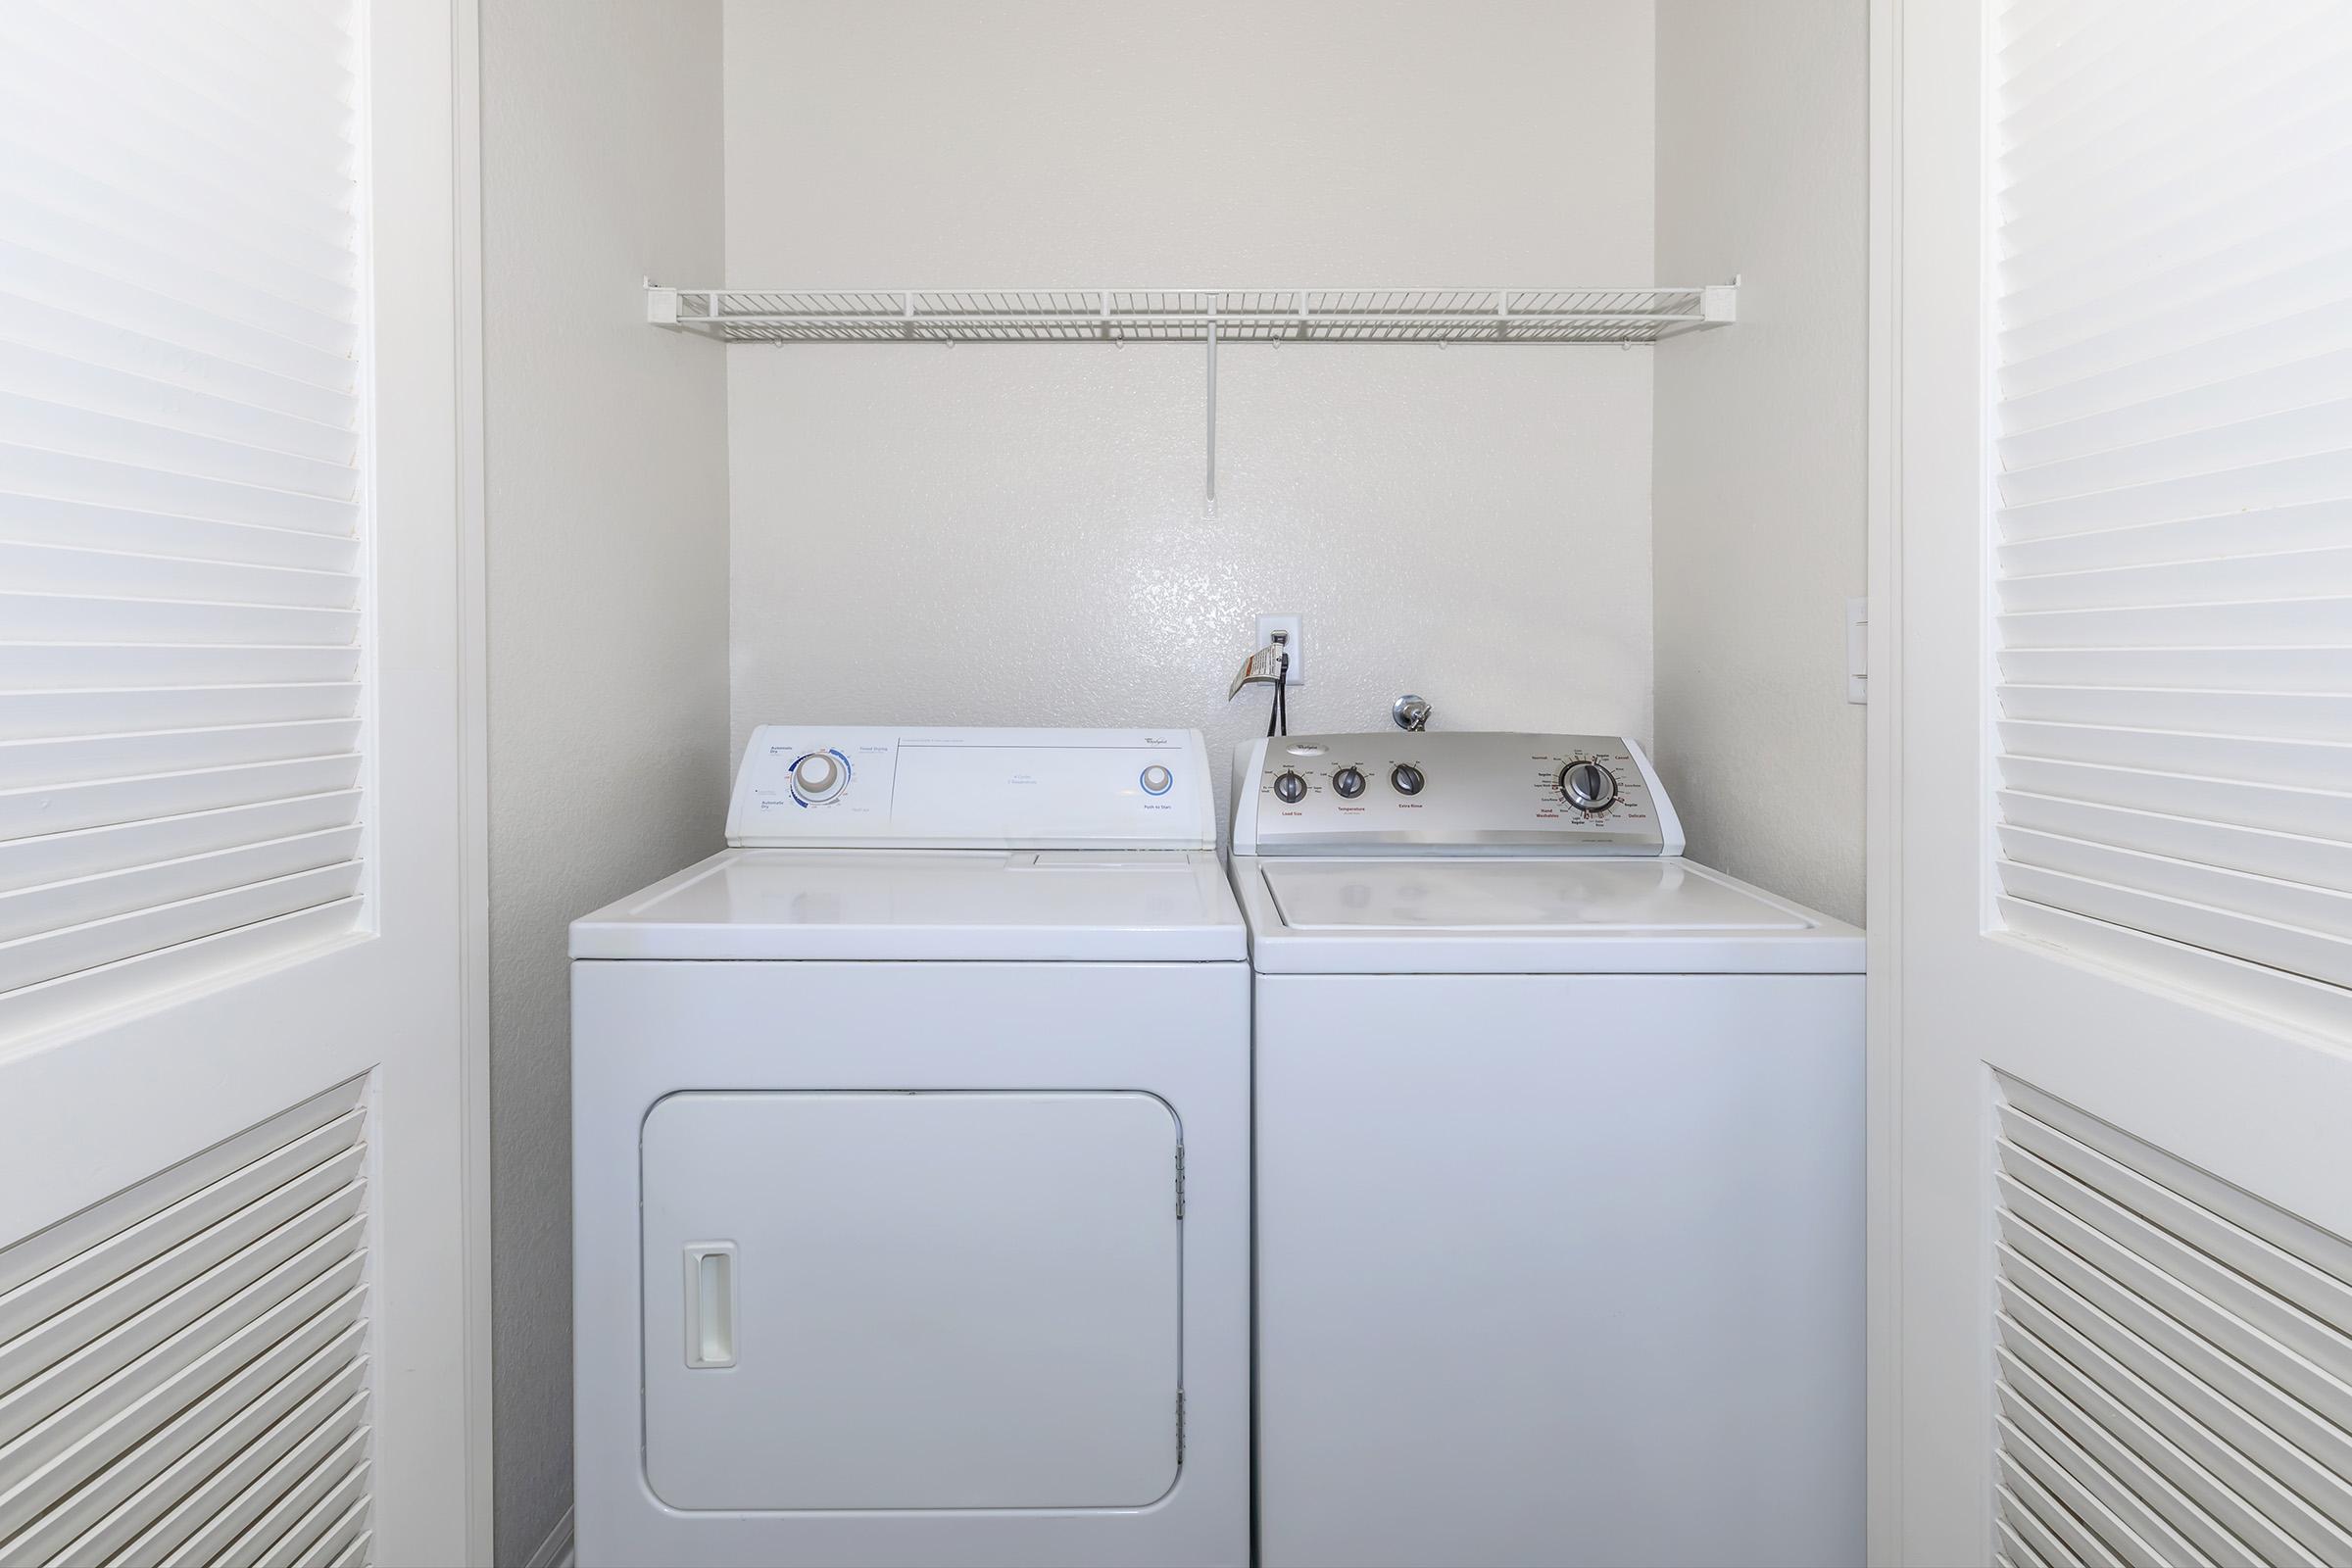 Laurel Glen Apartment Homes offers full size washers and dryers